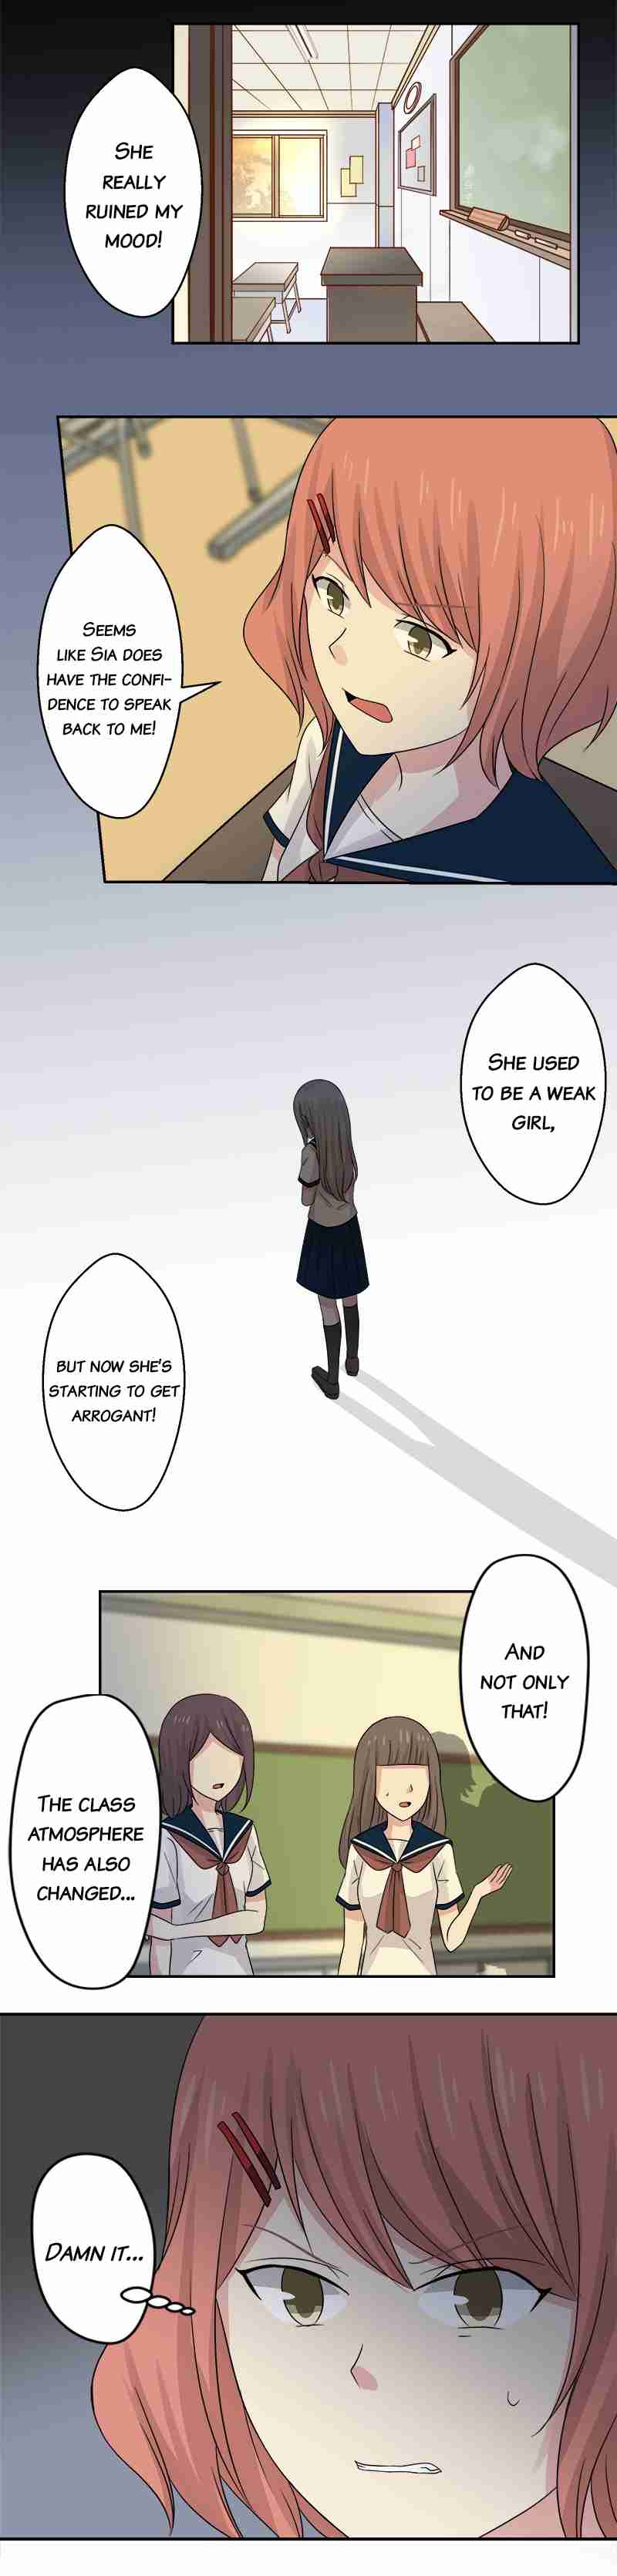 Switched Girls Ch. 23 You are my friend too!